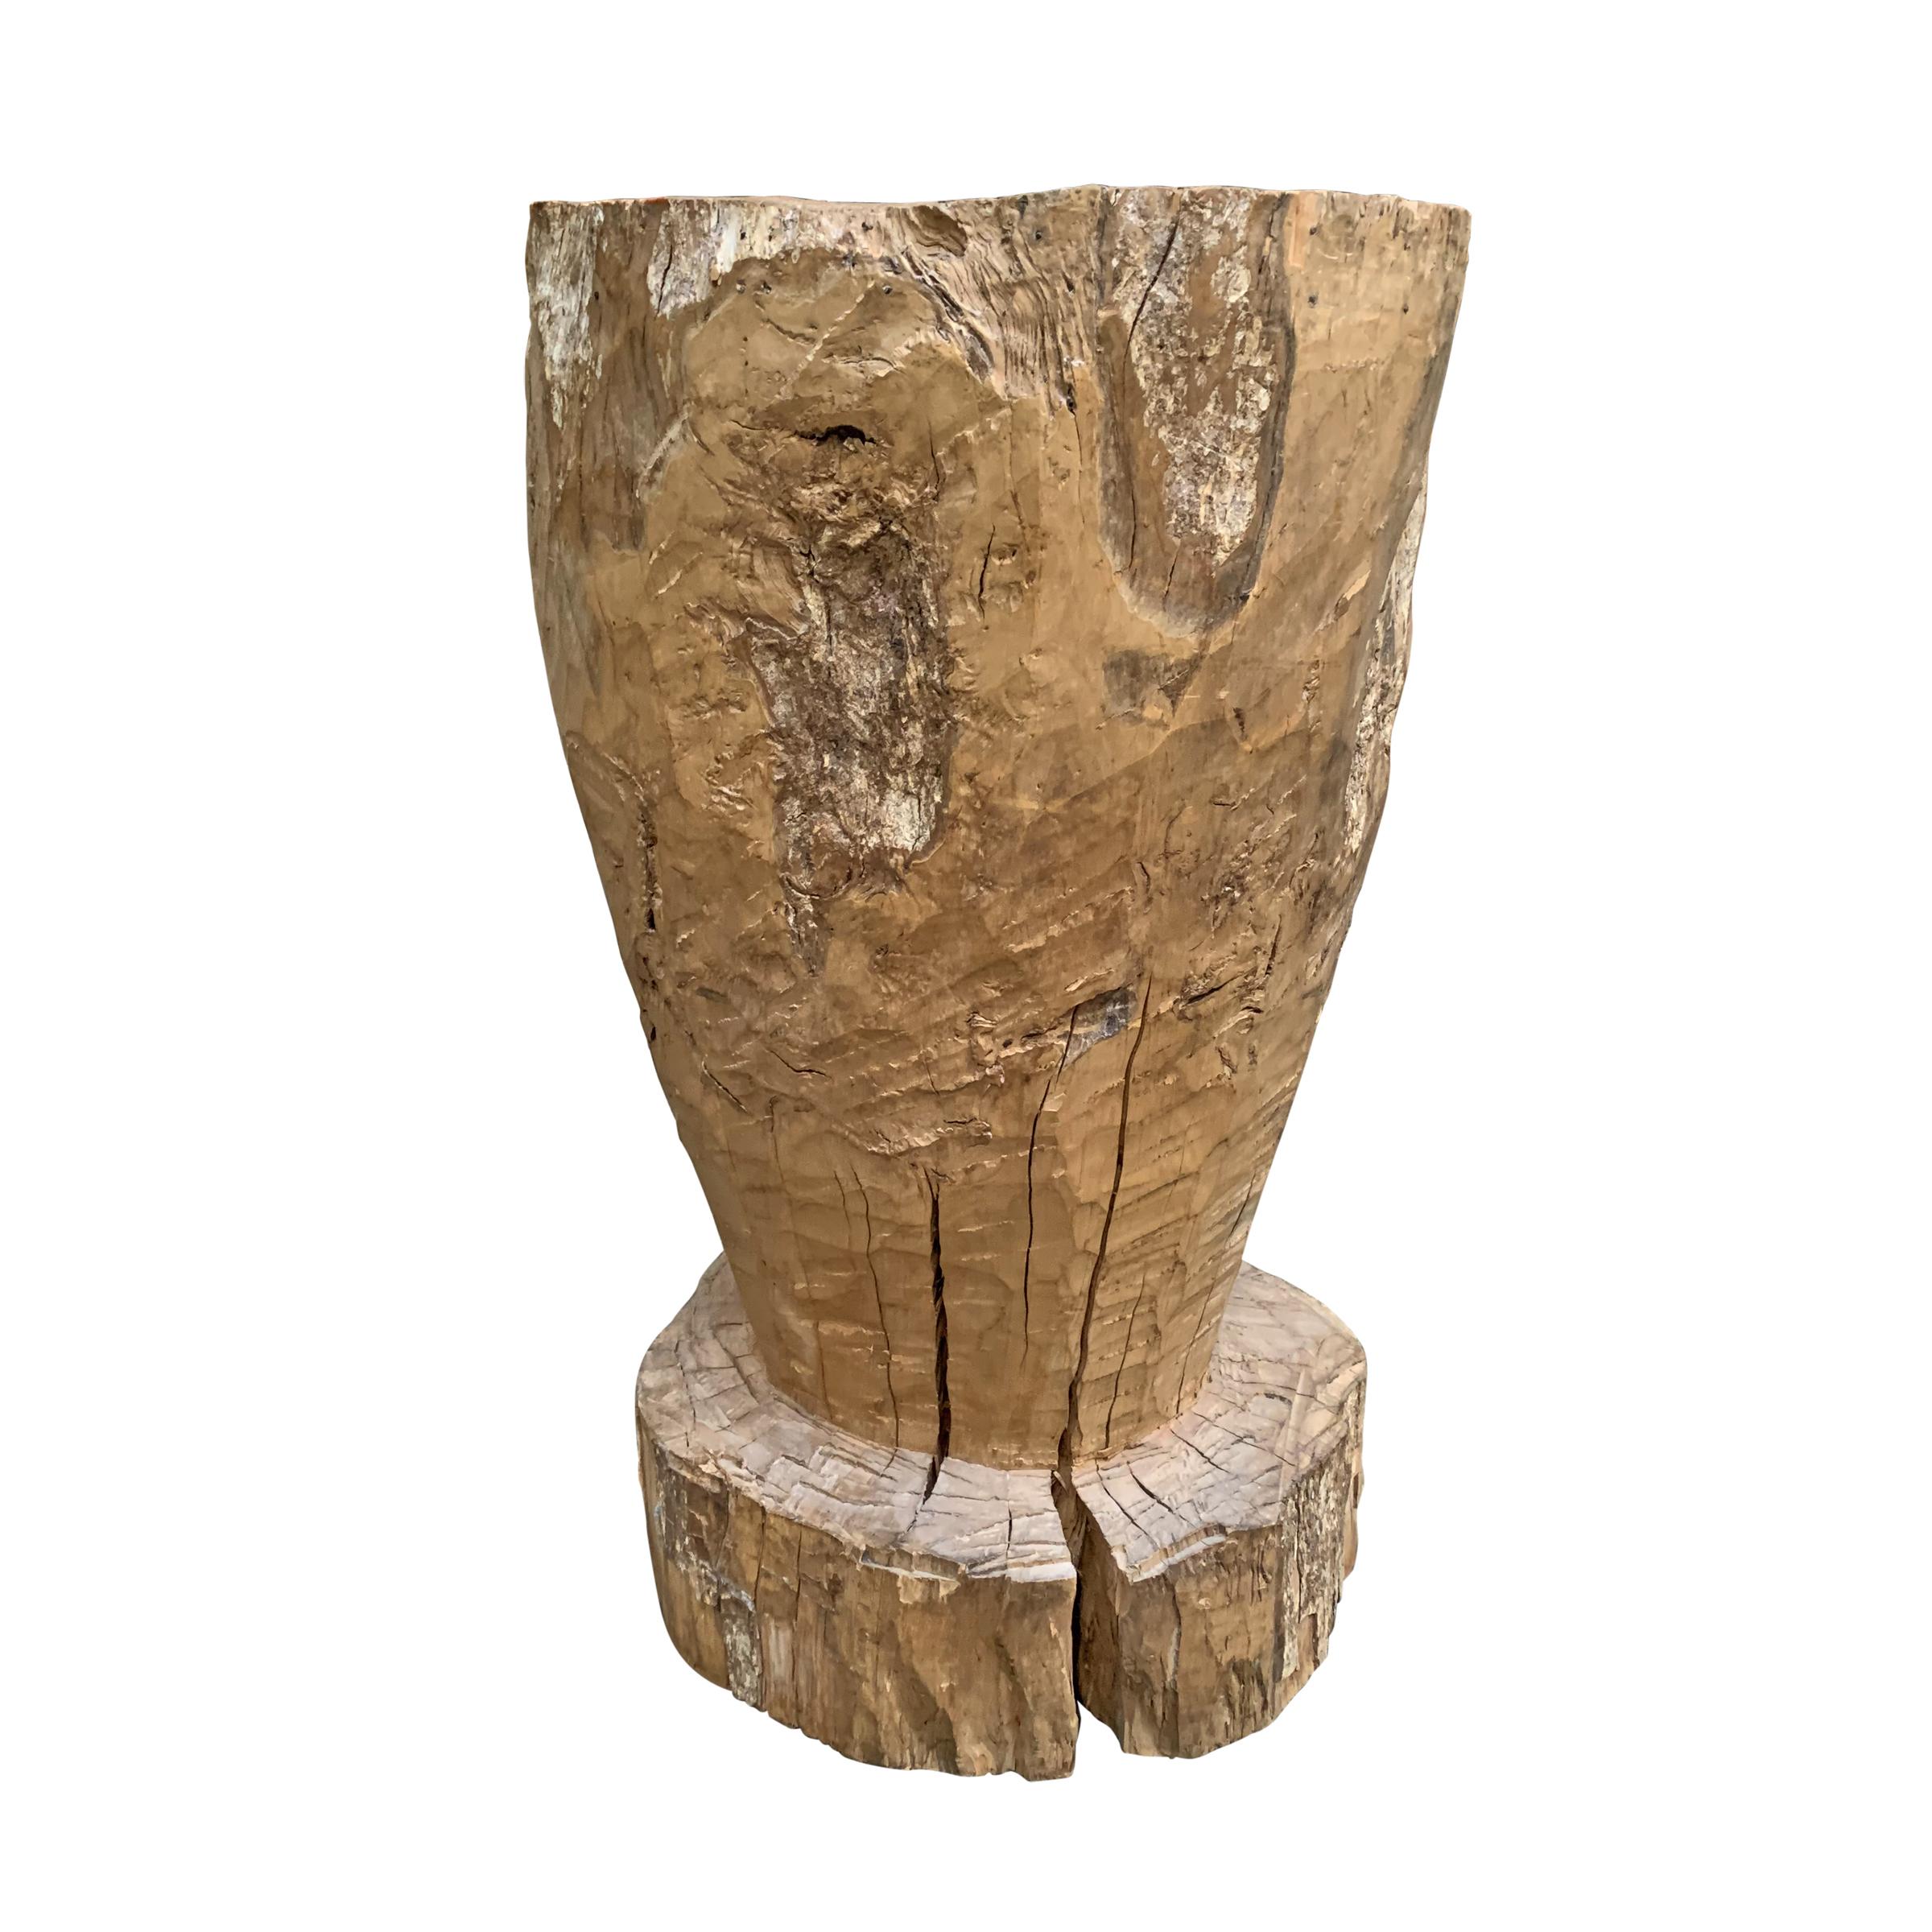 Hand-Carved Large 19th Century Wooden Mortar For Sale